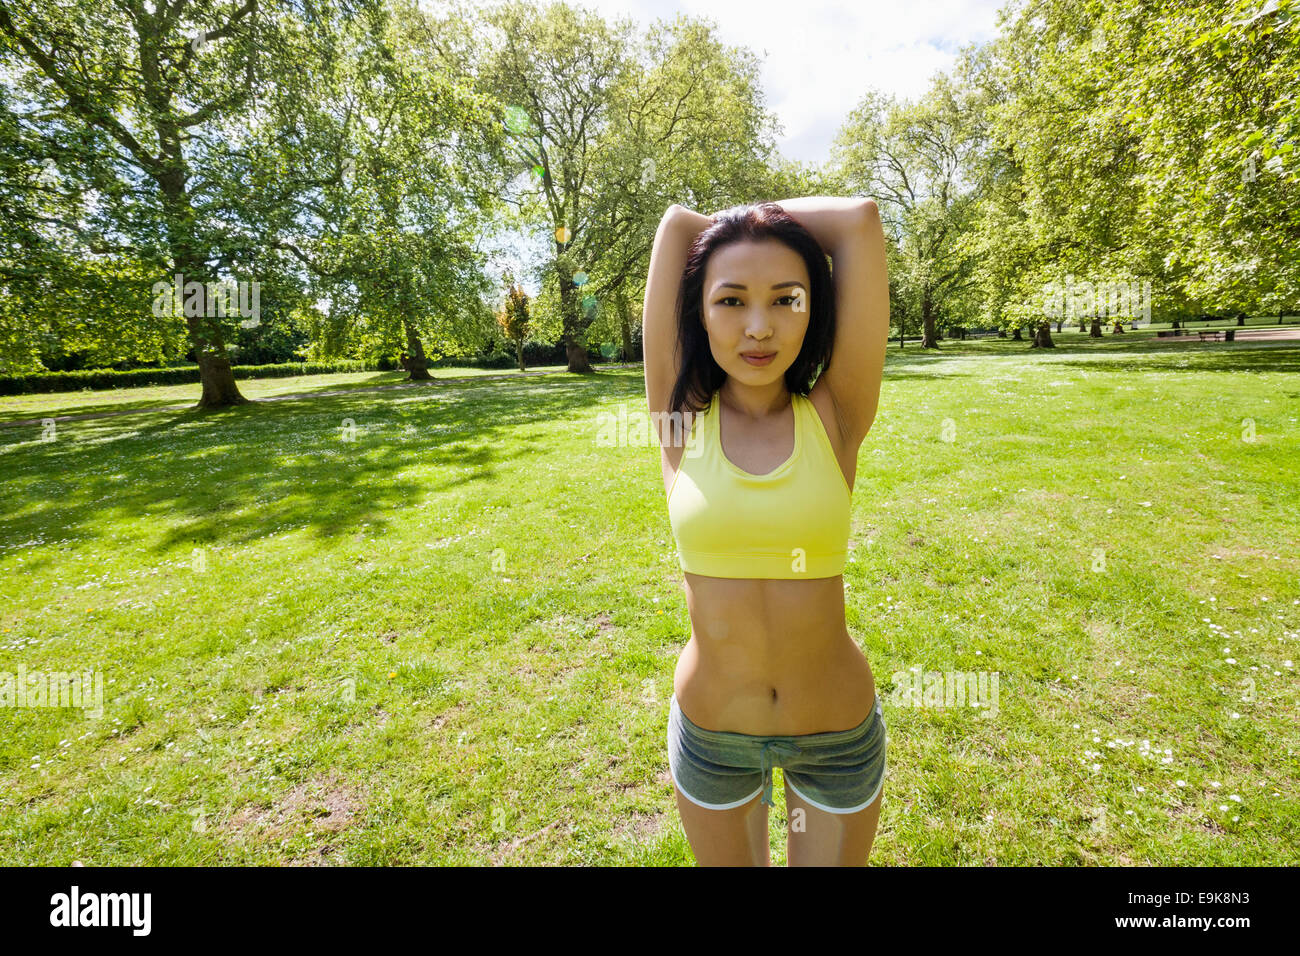 Portrait of young fit woman stretching at park Banque D'Images